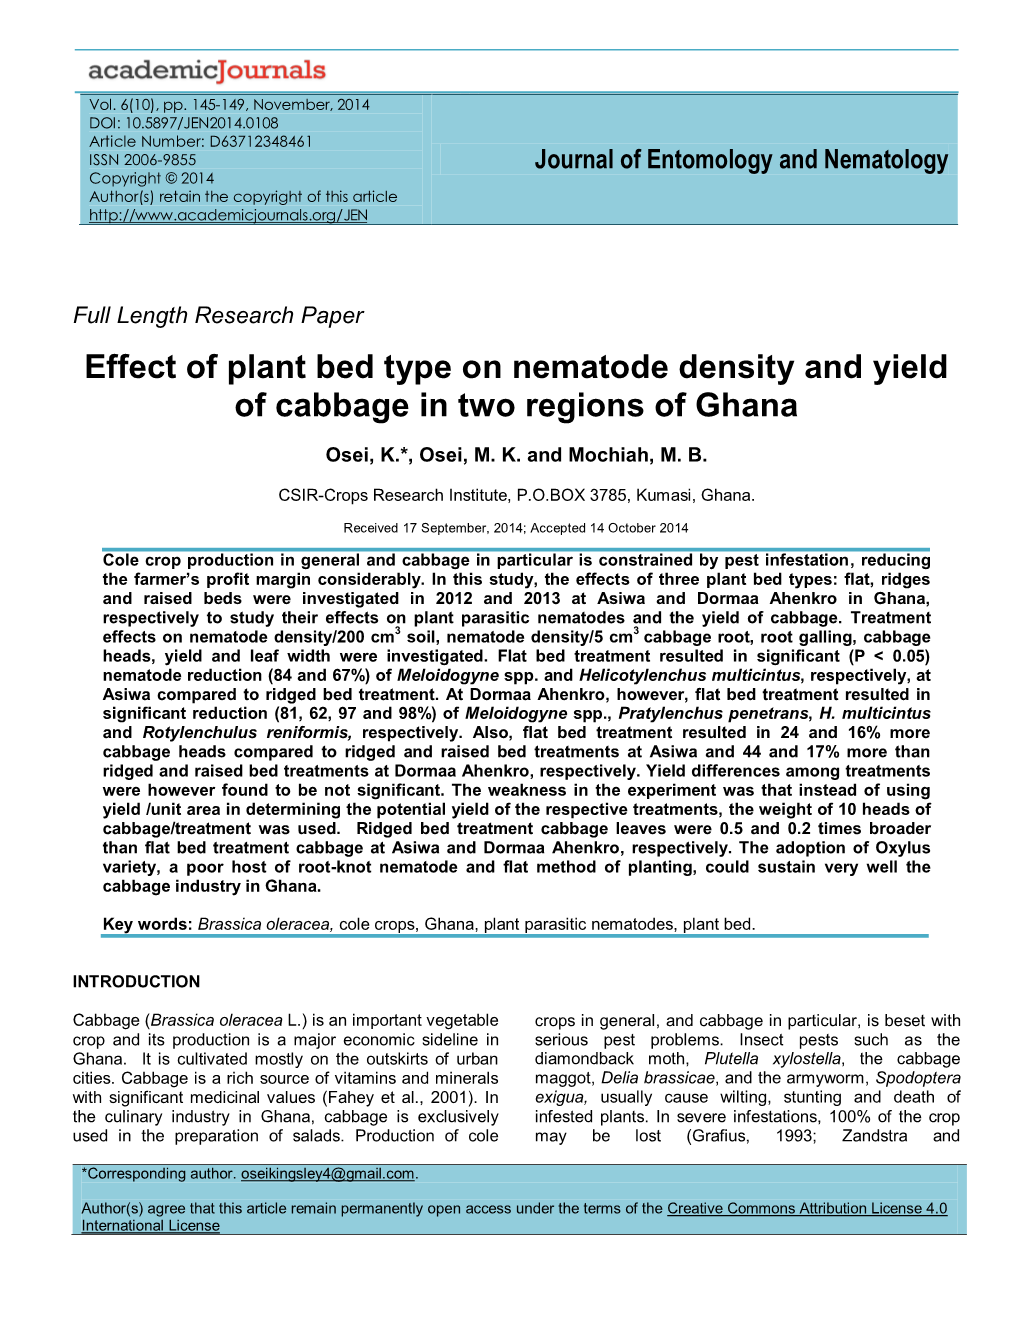 Effect of Plant Bed Type on Nematode Density and Yield of Cabbage in Two Regions of Ghana